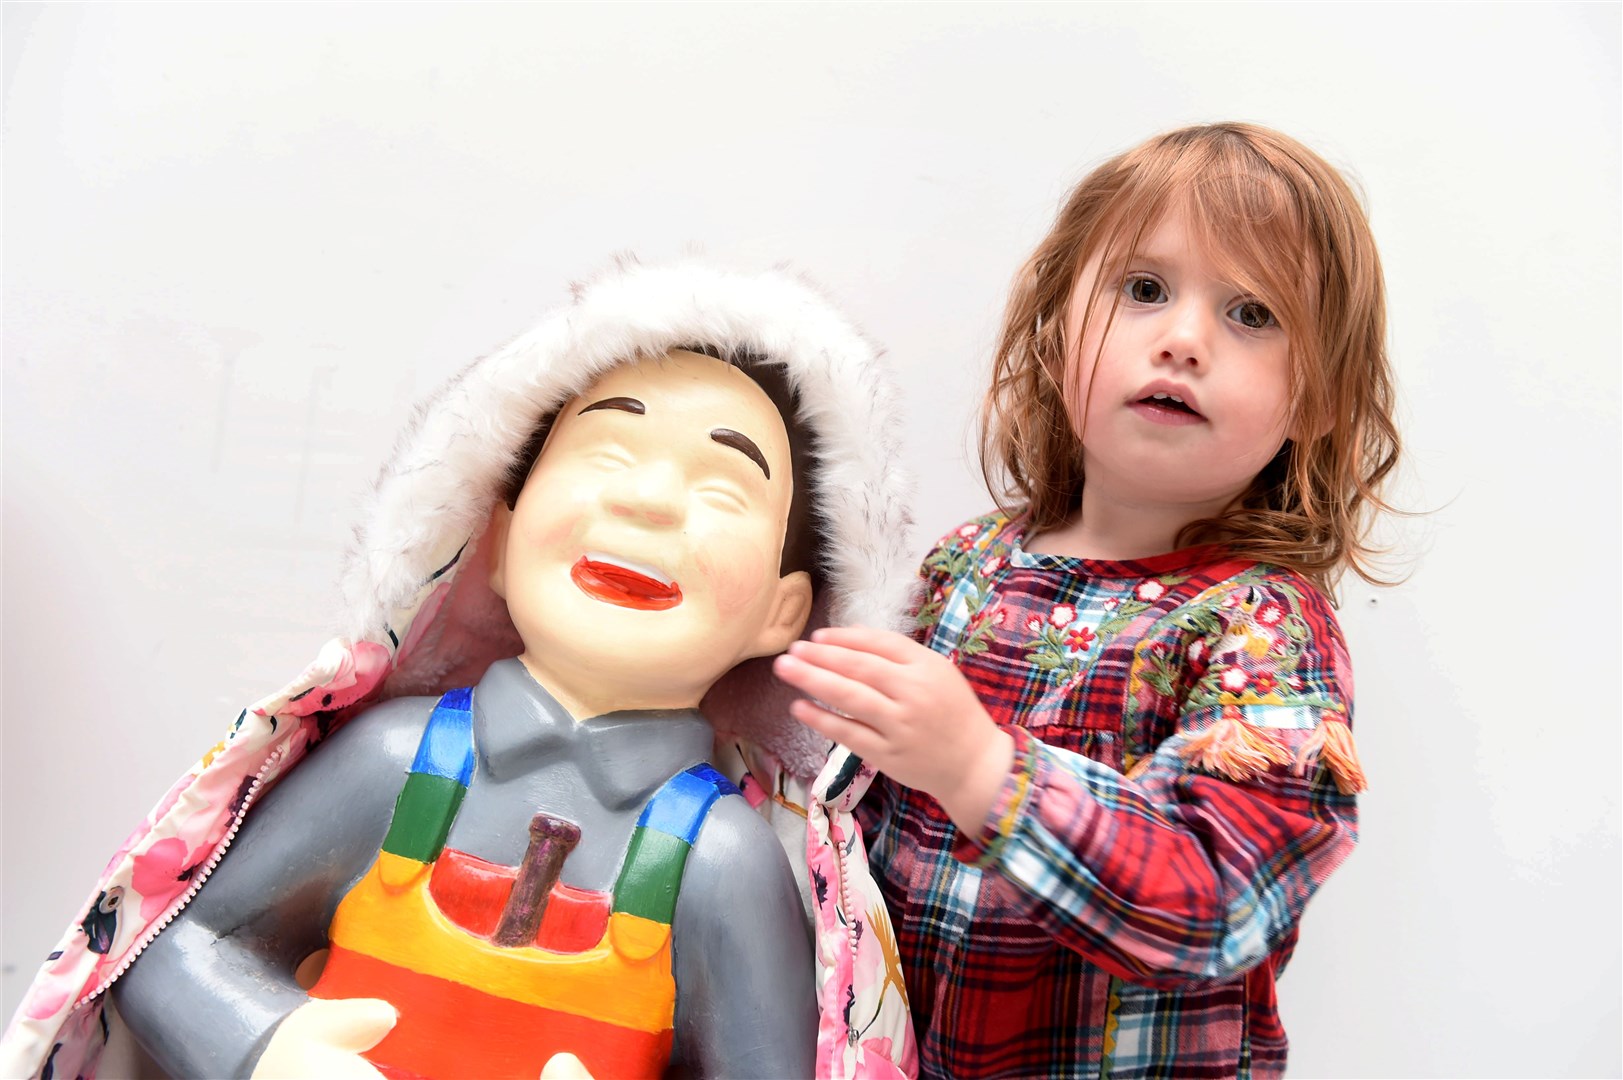 Runa Taylor thought this Oor Wullie was a bit cold so she gave him her coat.